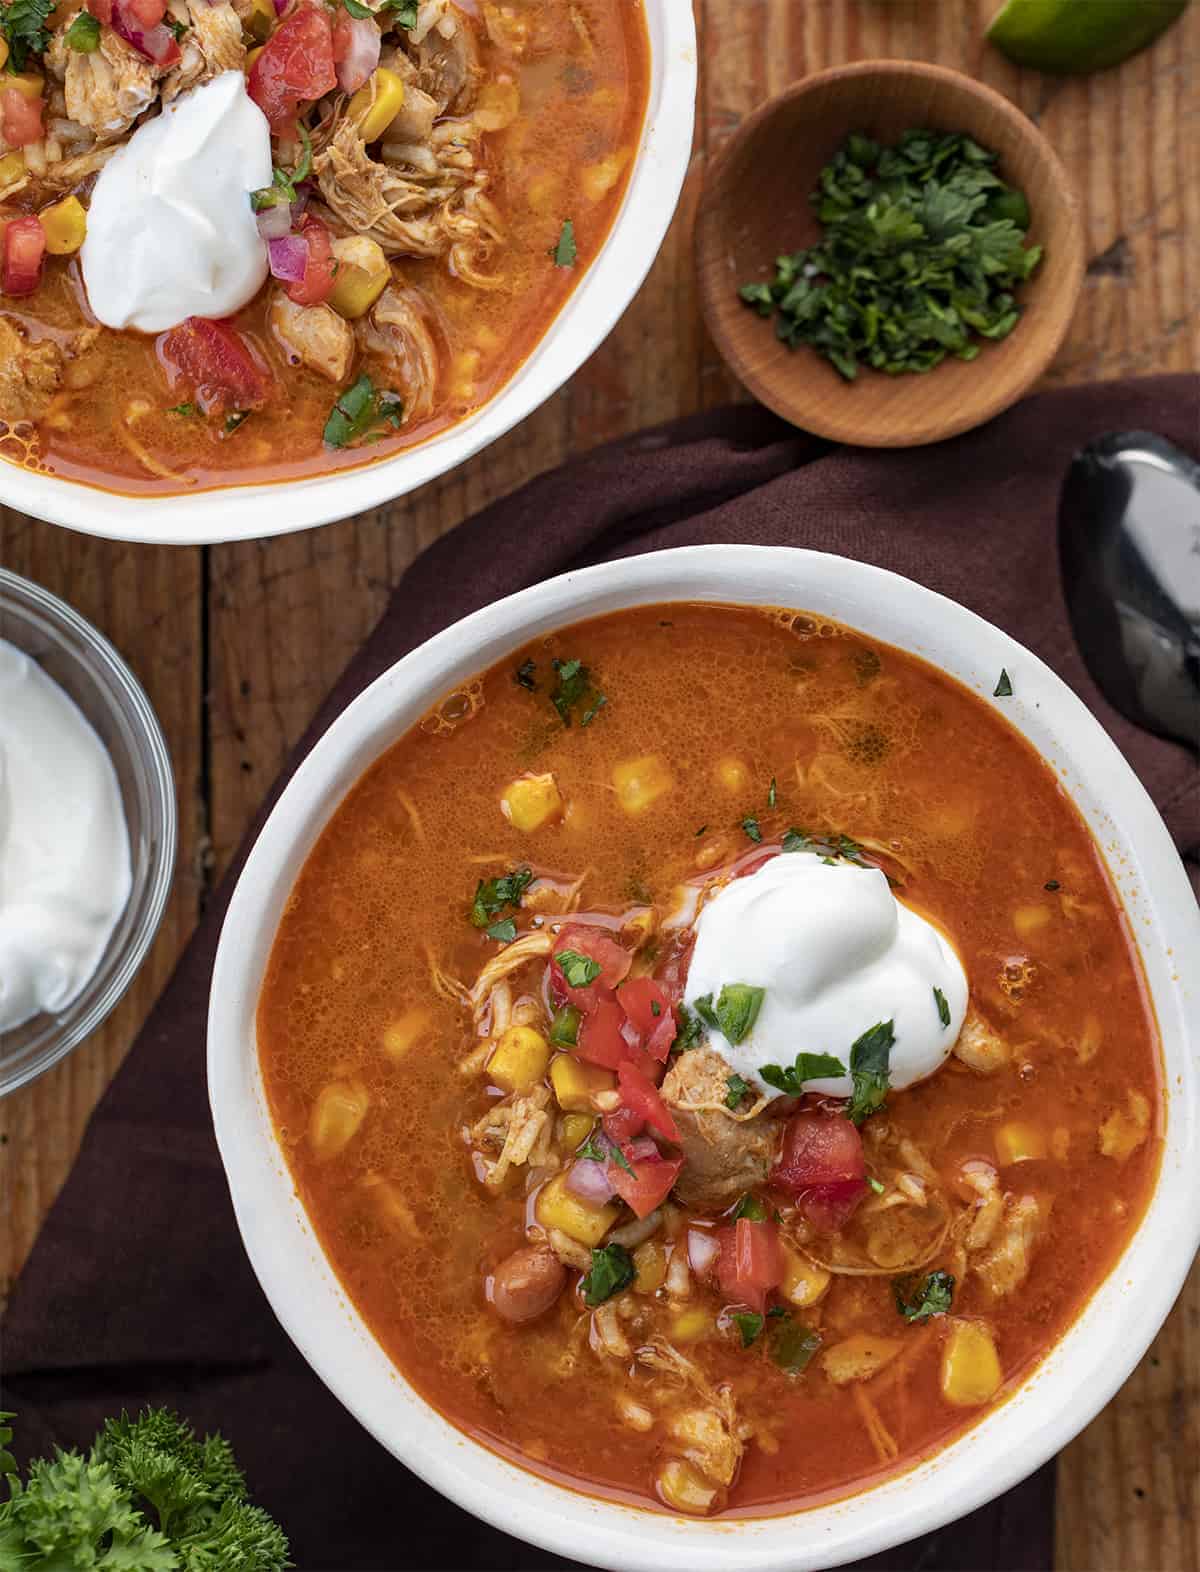 Bowls of Spicy Chipotle Chicken Soup from overhead